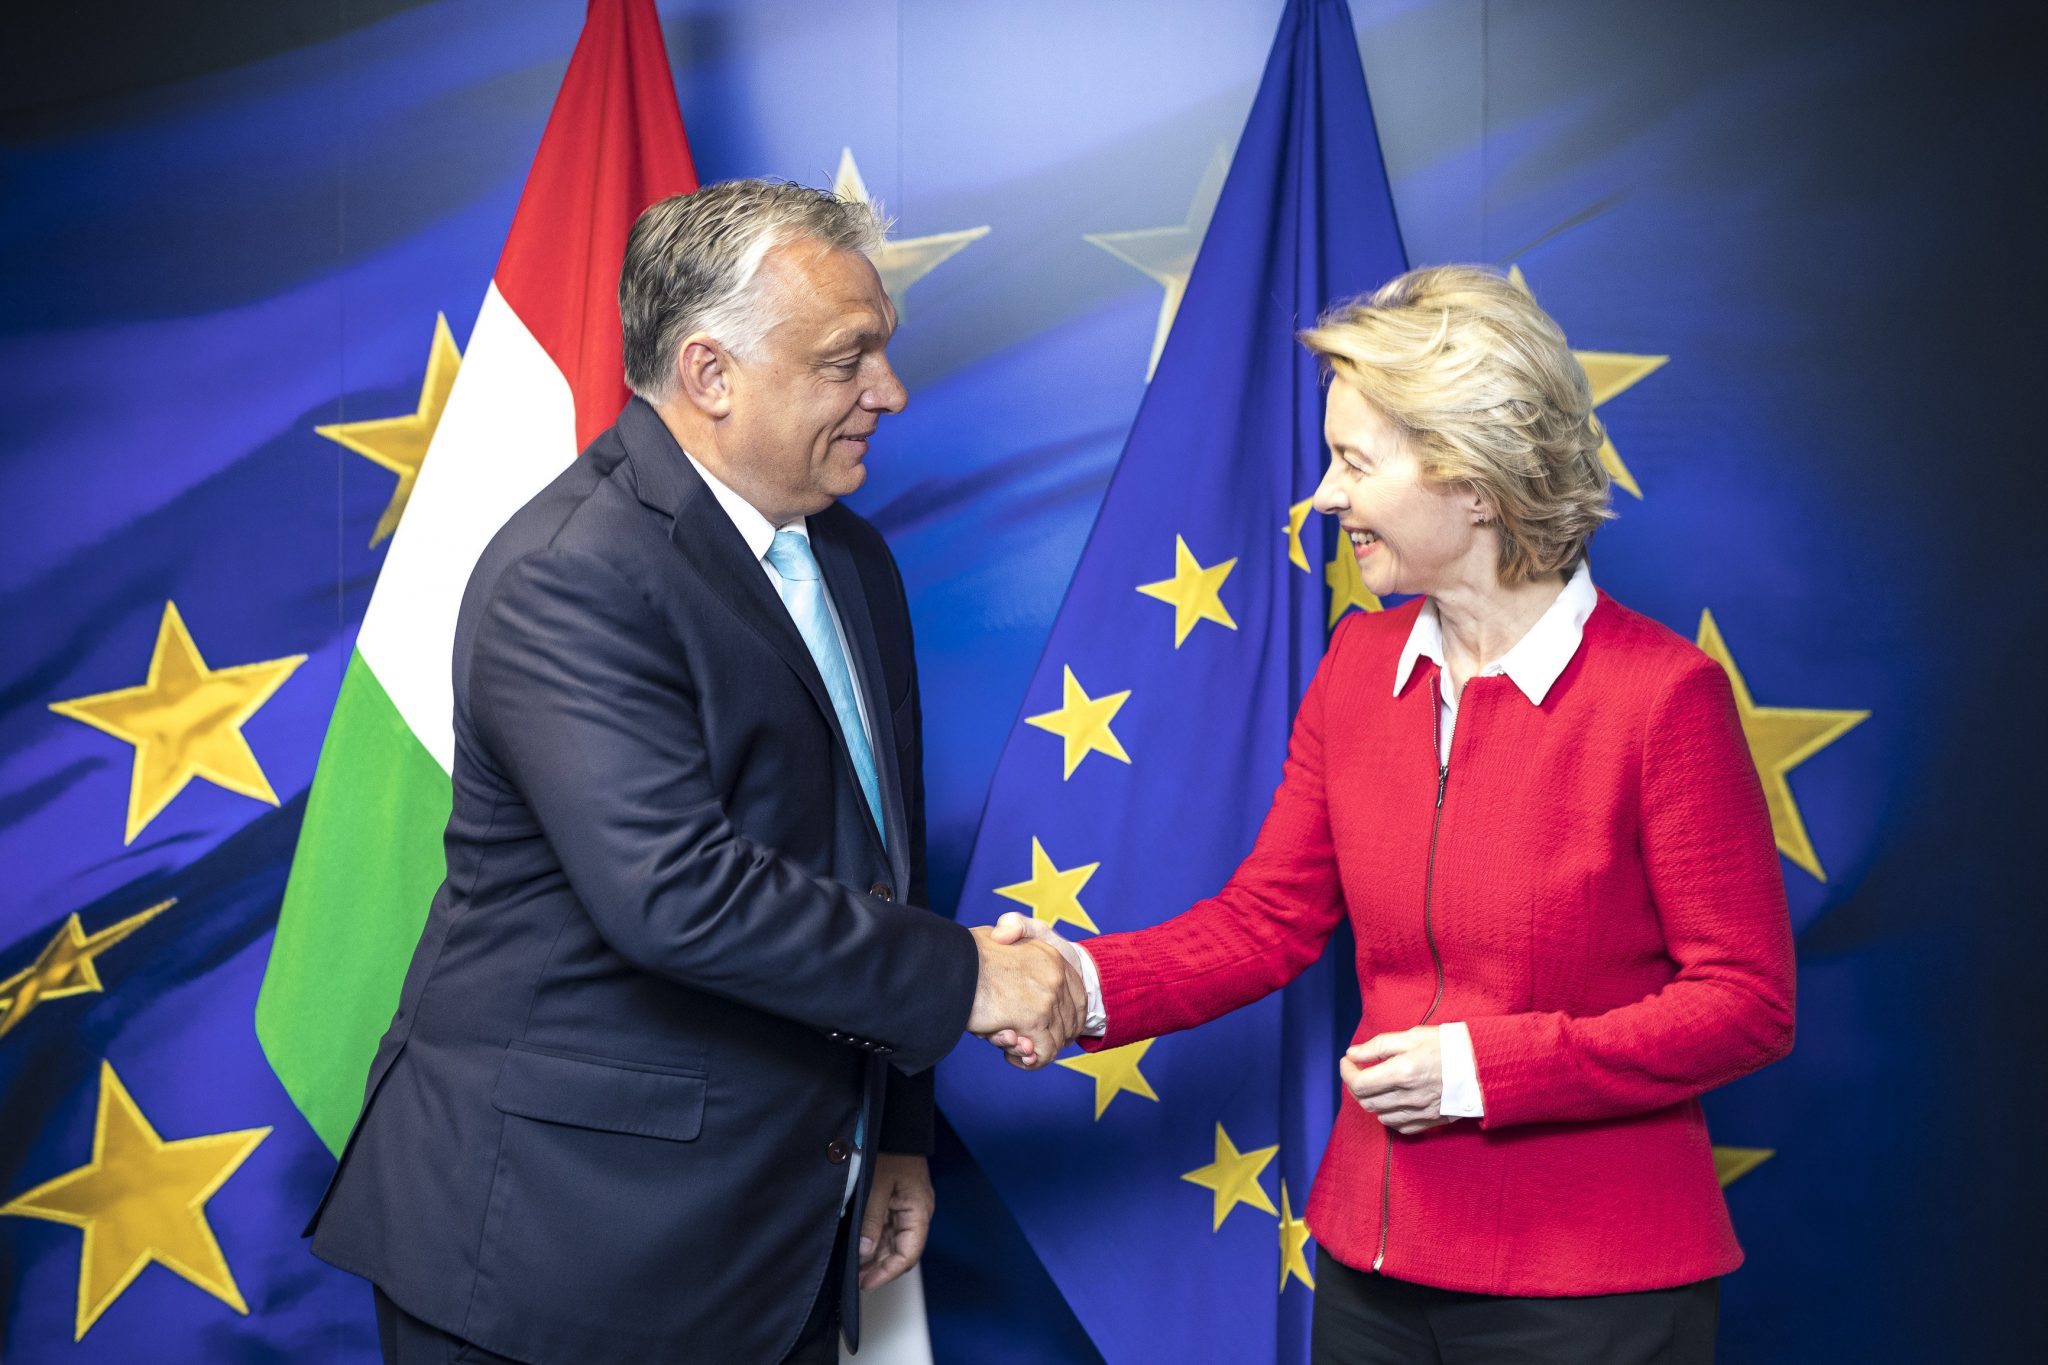 Background: Orbán unexpectedly asks Brussels to disburse reconstruction fund and EU loans